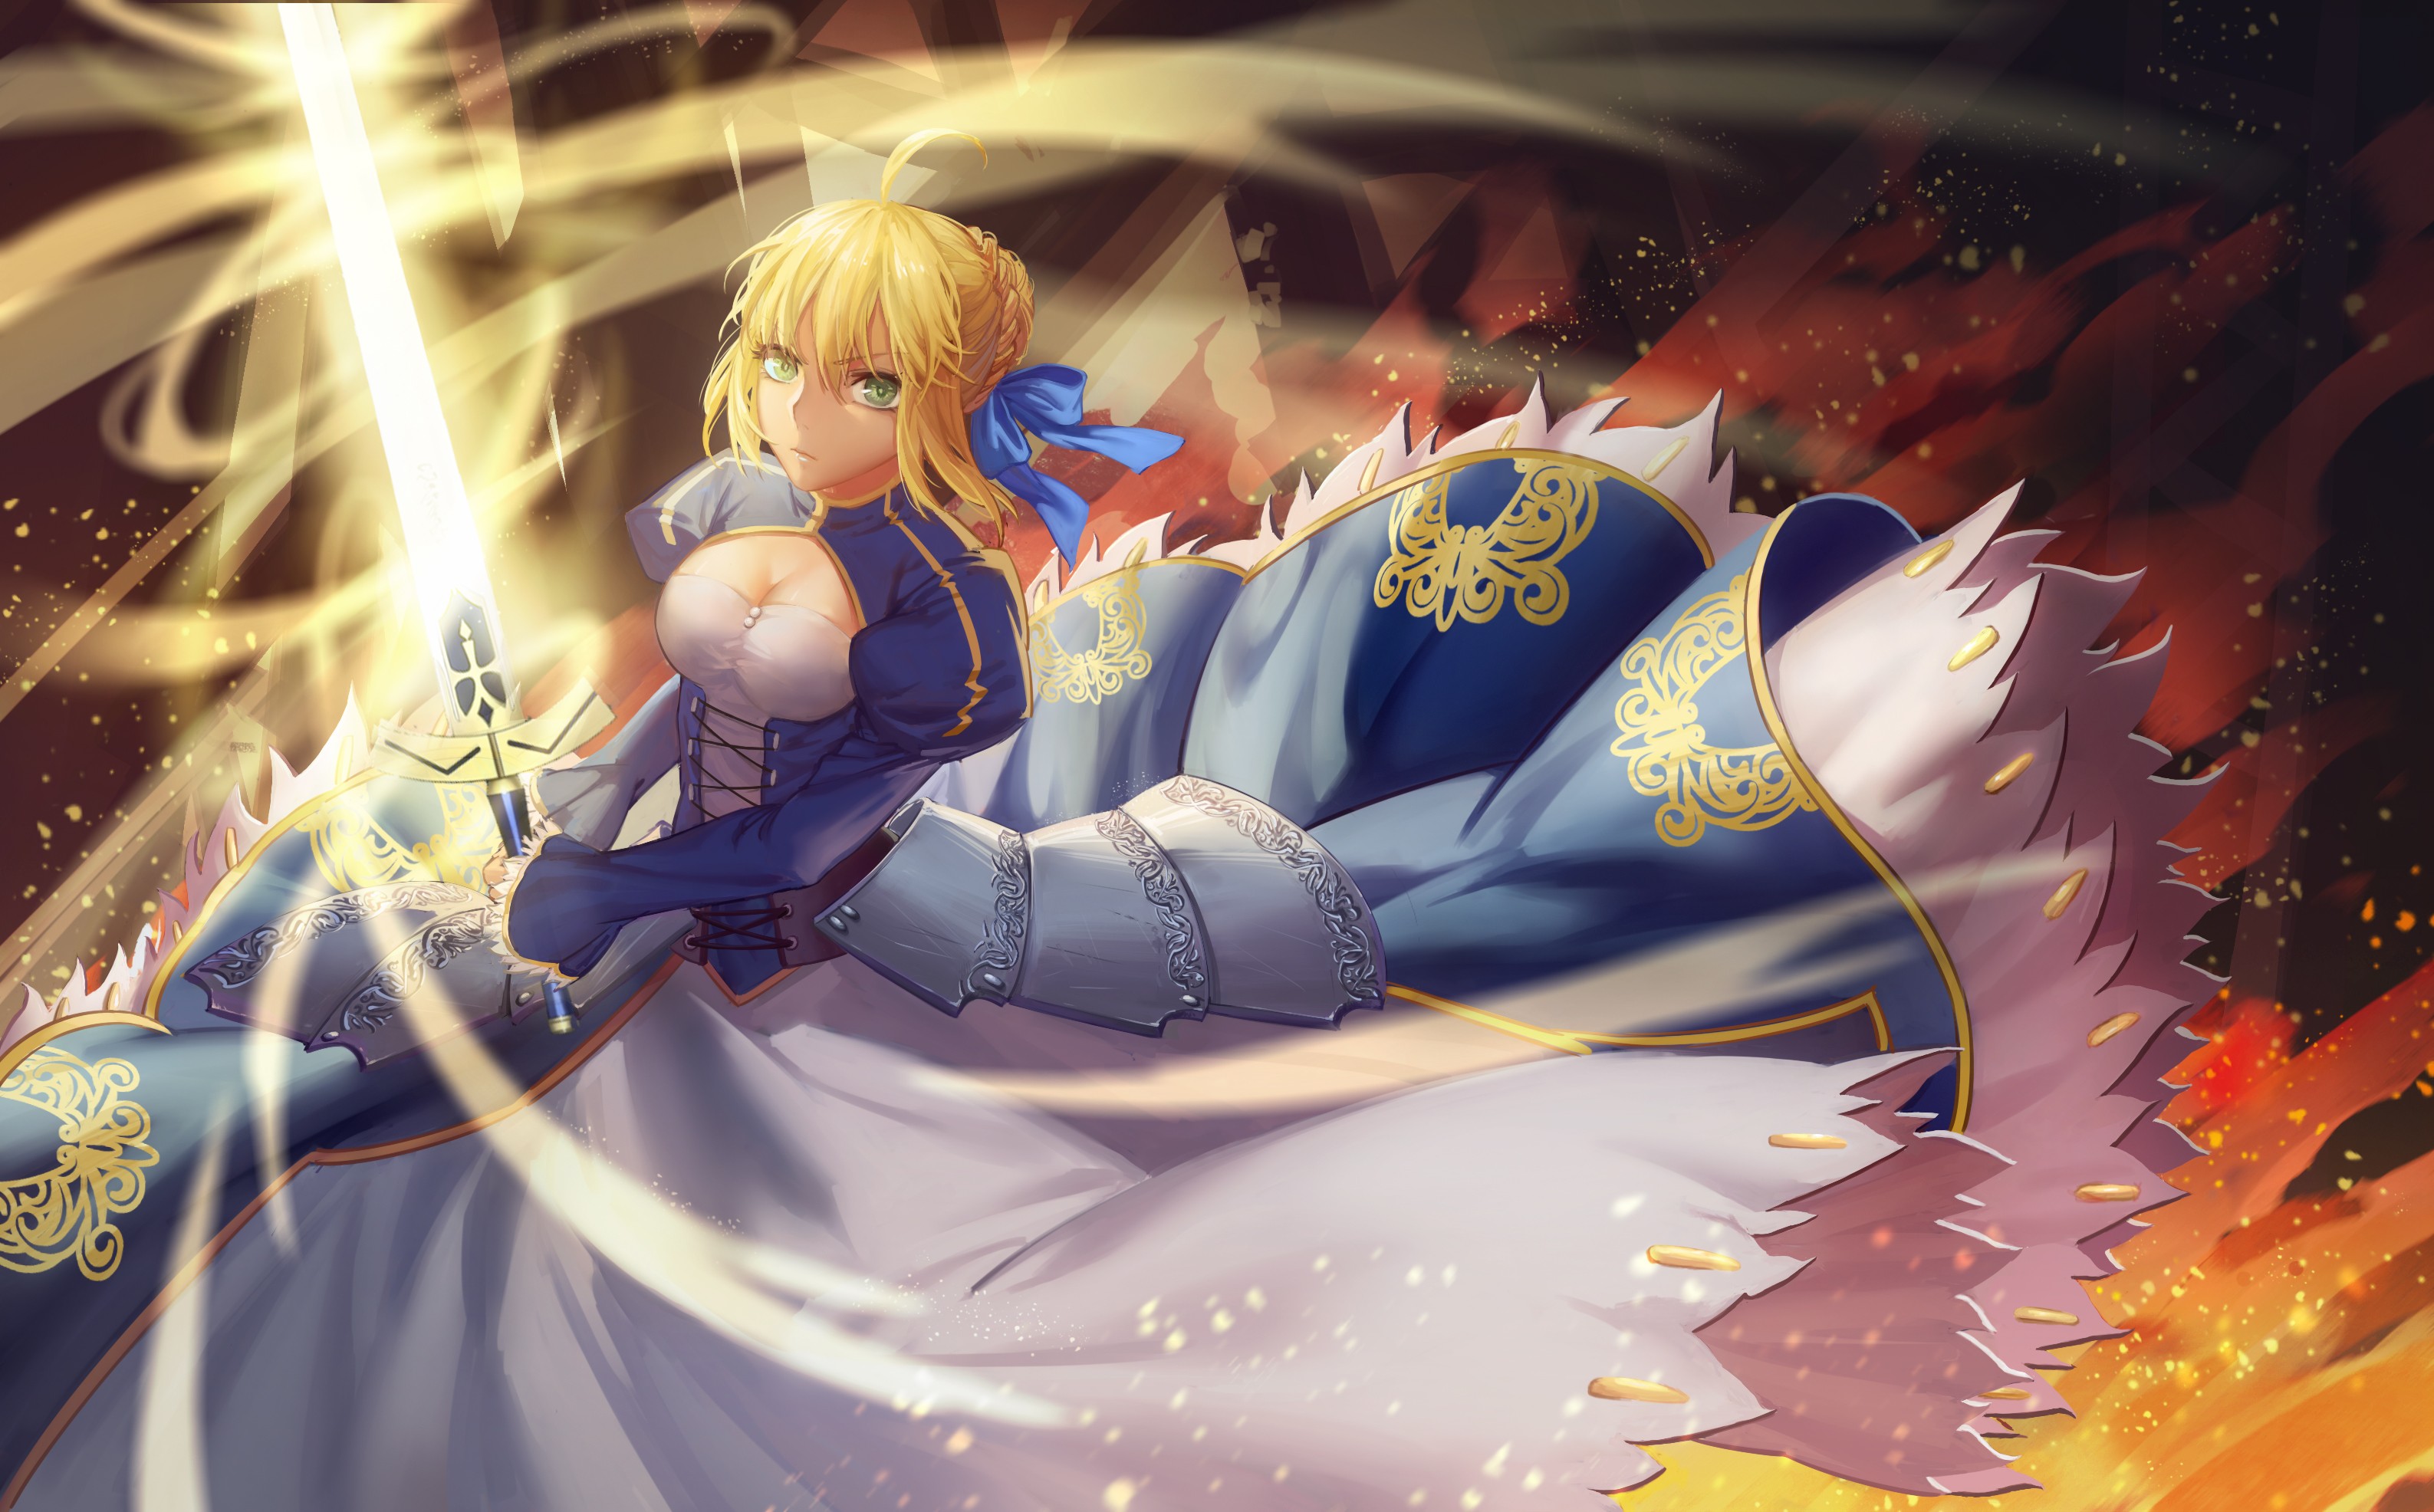 Anime 3174x1972 blonde Fate/Stay Night Fate series Saber dress armor sword